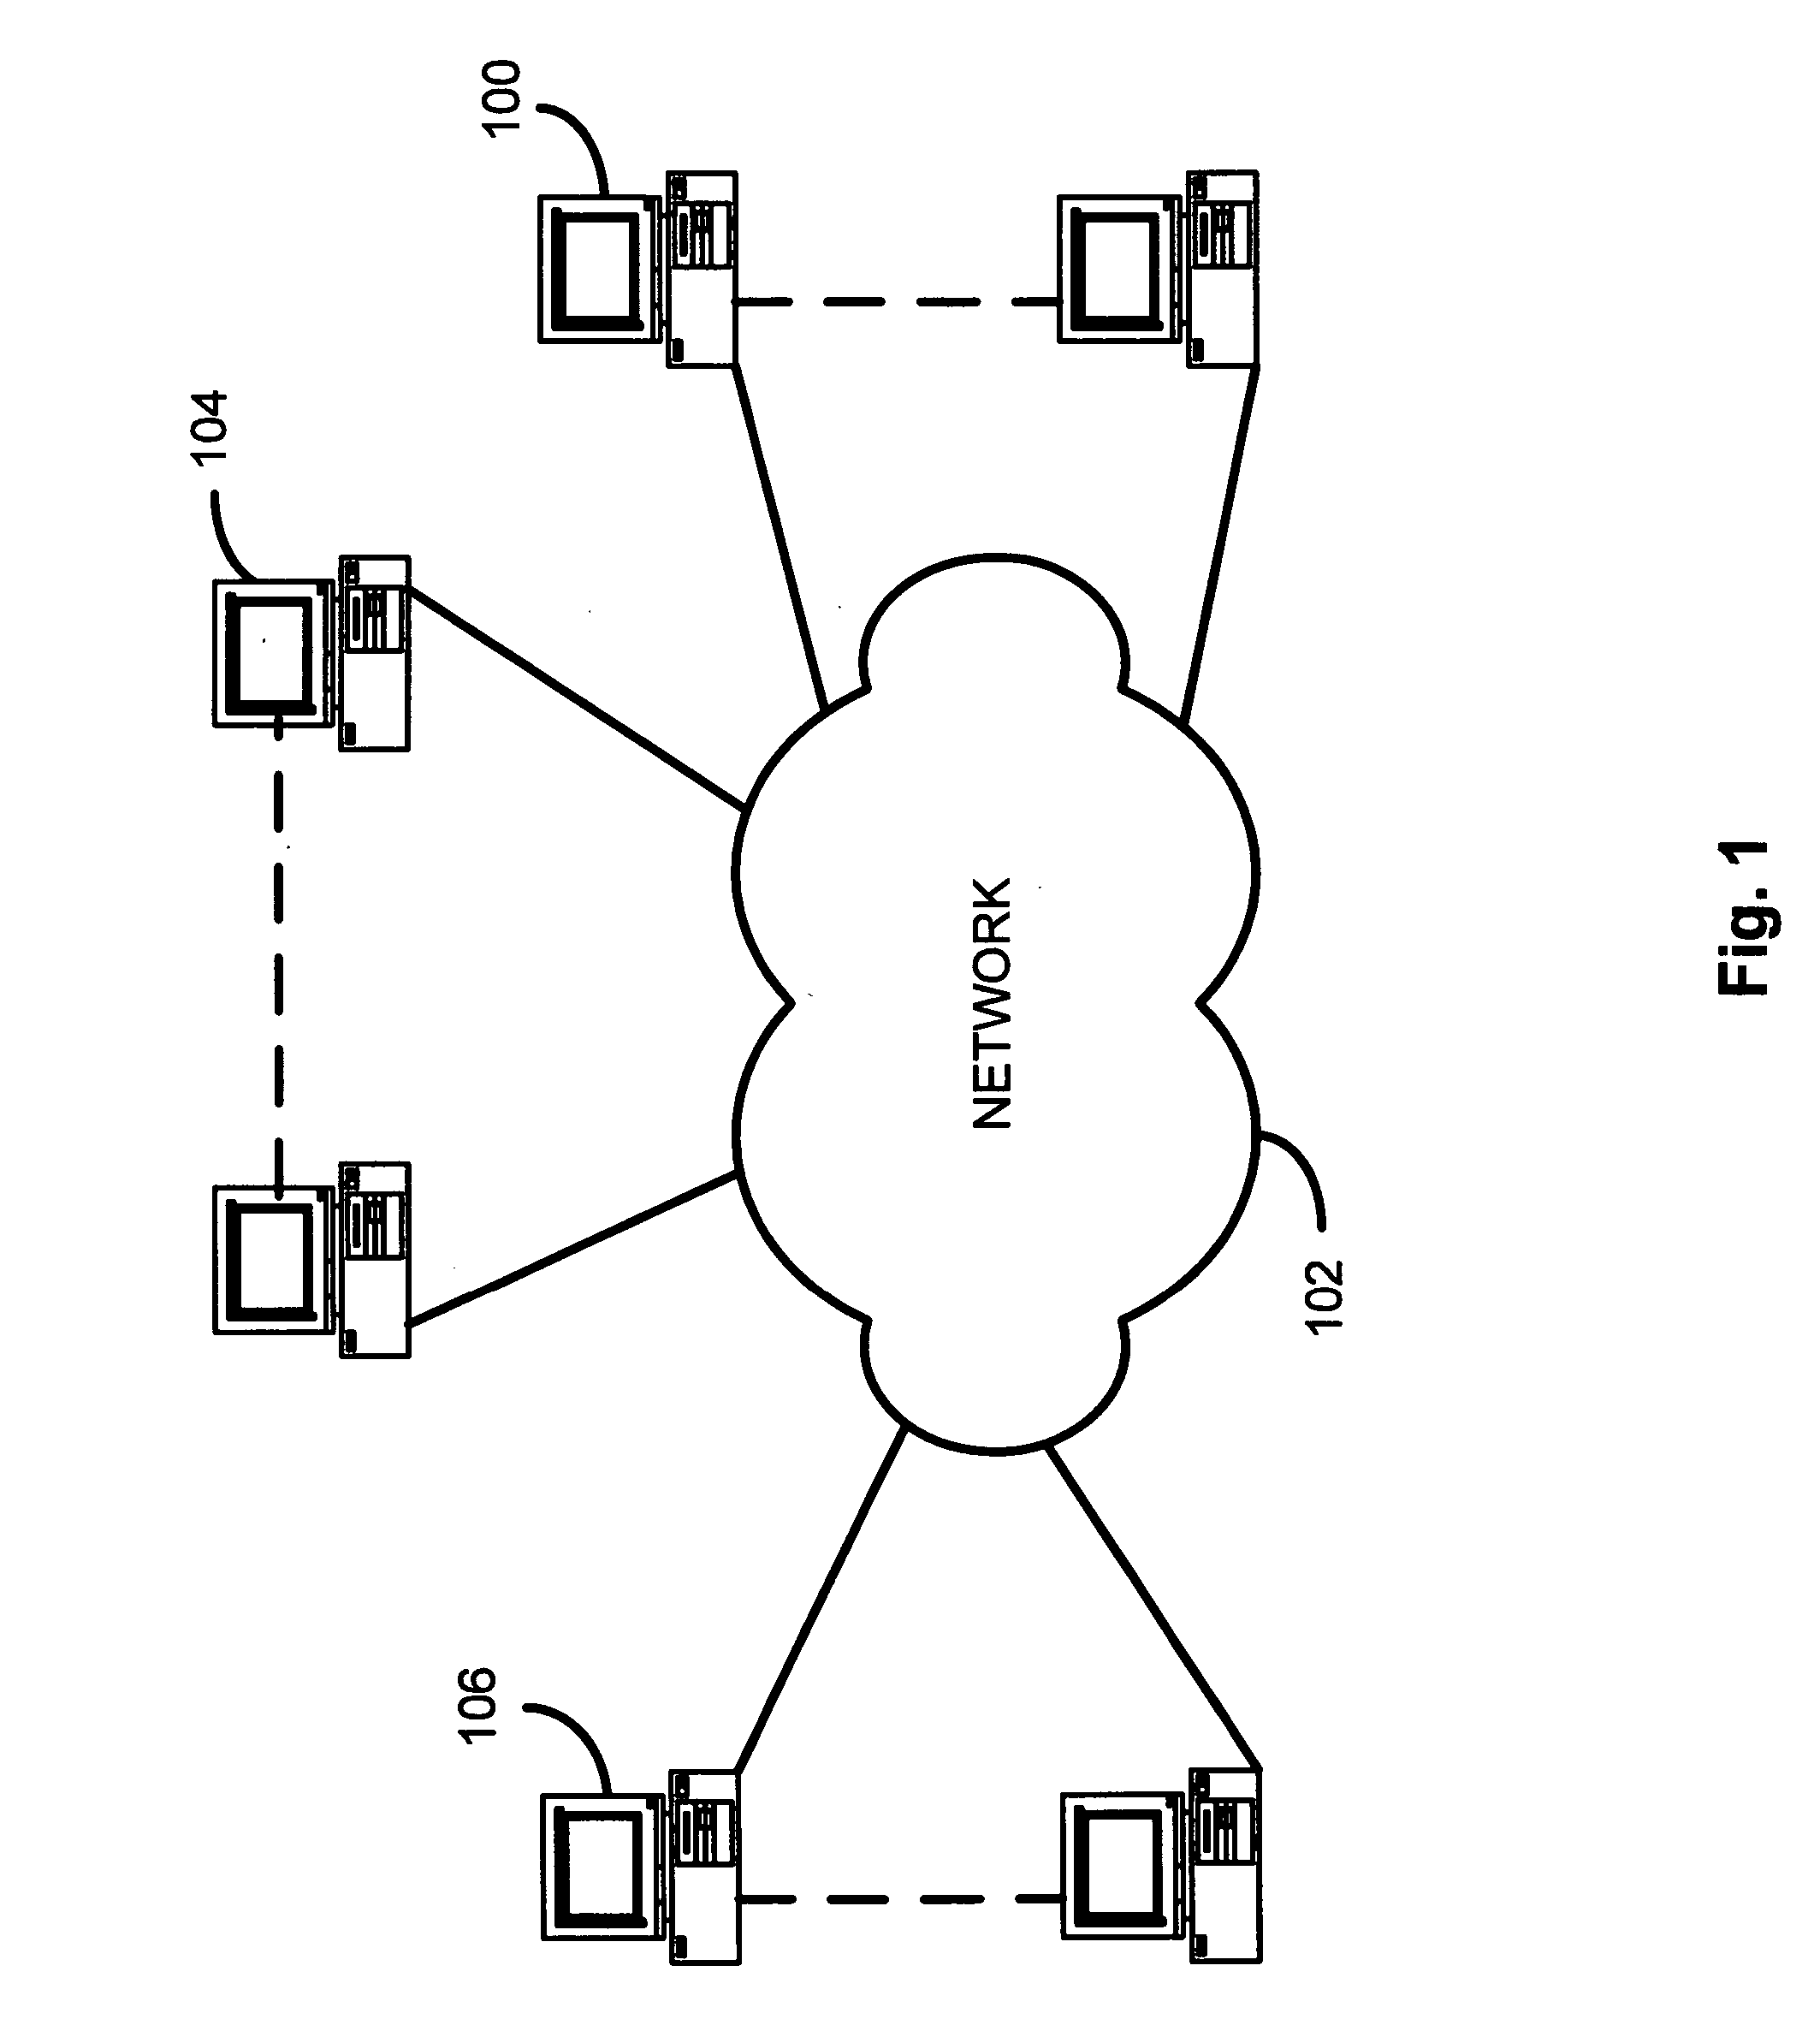 Method and apparatus for adding a search filter for web pages based on page type